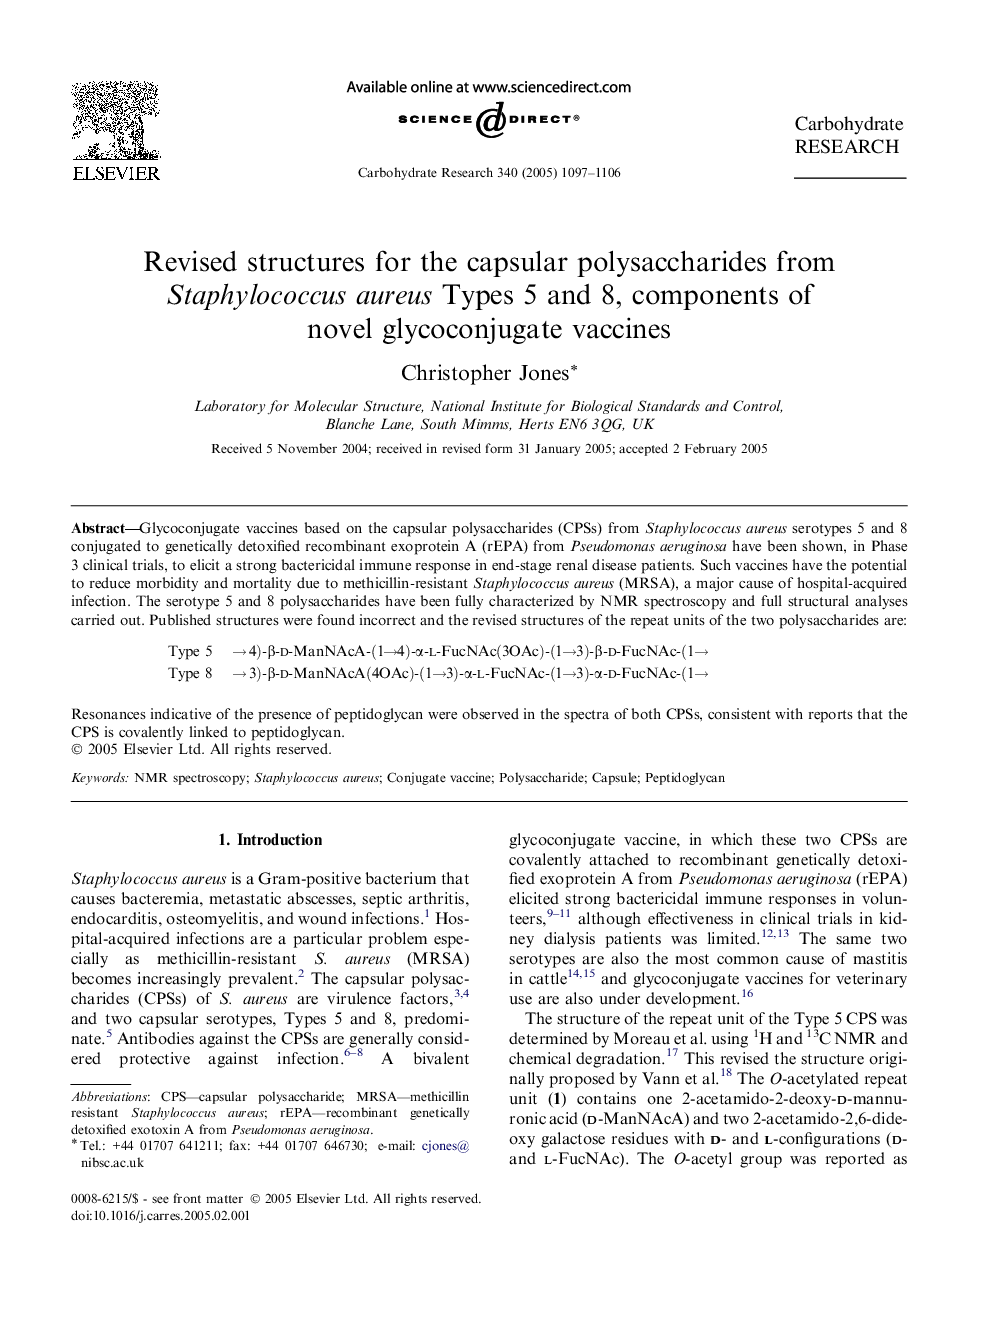 Revised structures for the capsular polysaccharides from Staphylococcus aureus Types 5 and 8, components of novel glycoconjugate vaccines